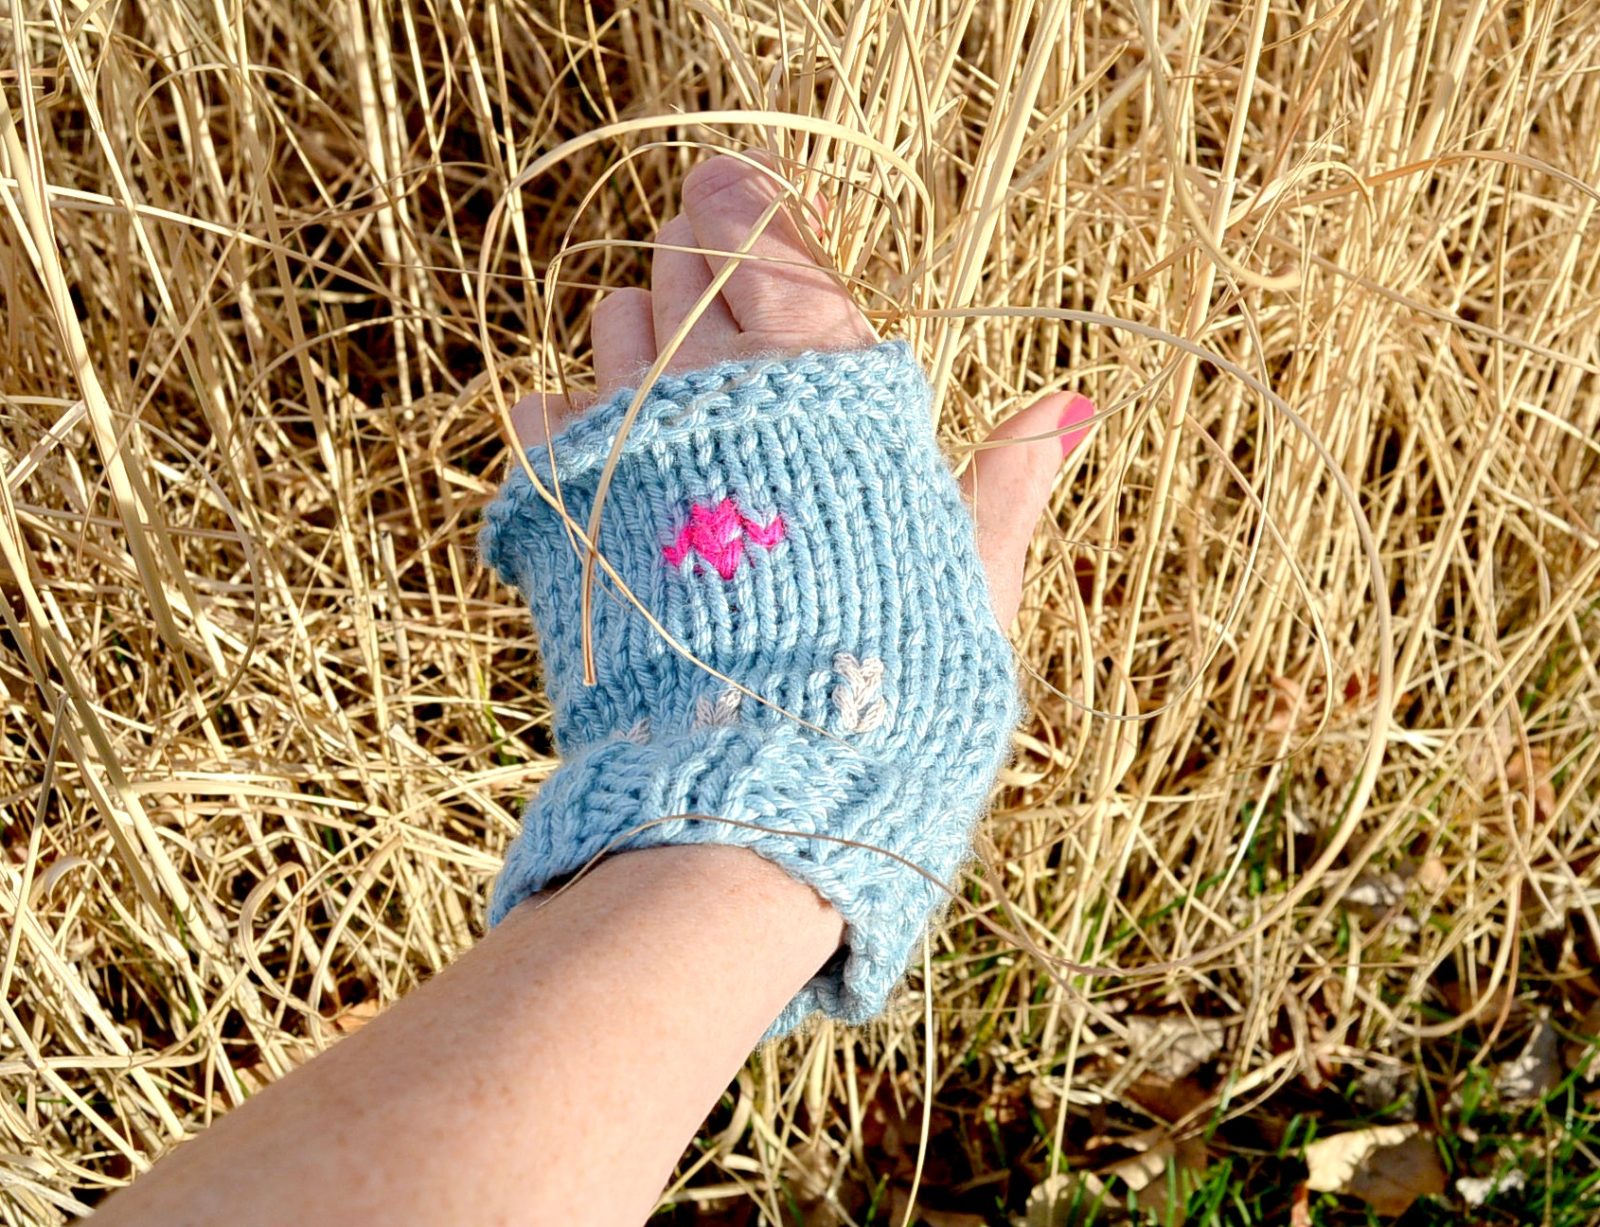 How to knit fingerless gloves for beginners - Really easy pattern you can  knit flat 